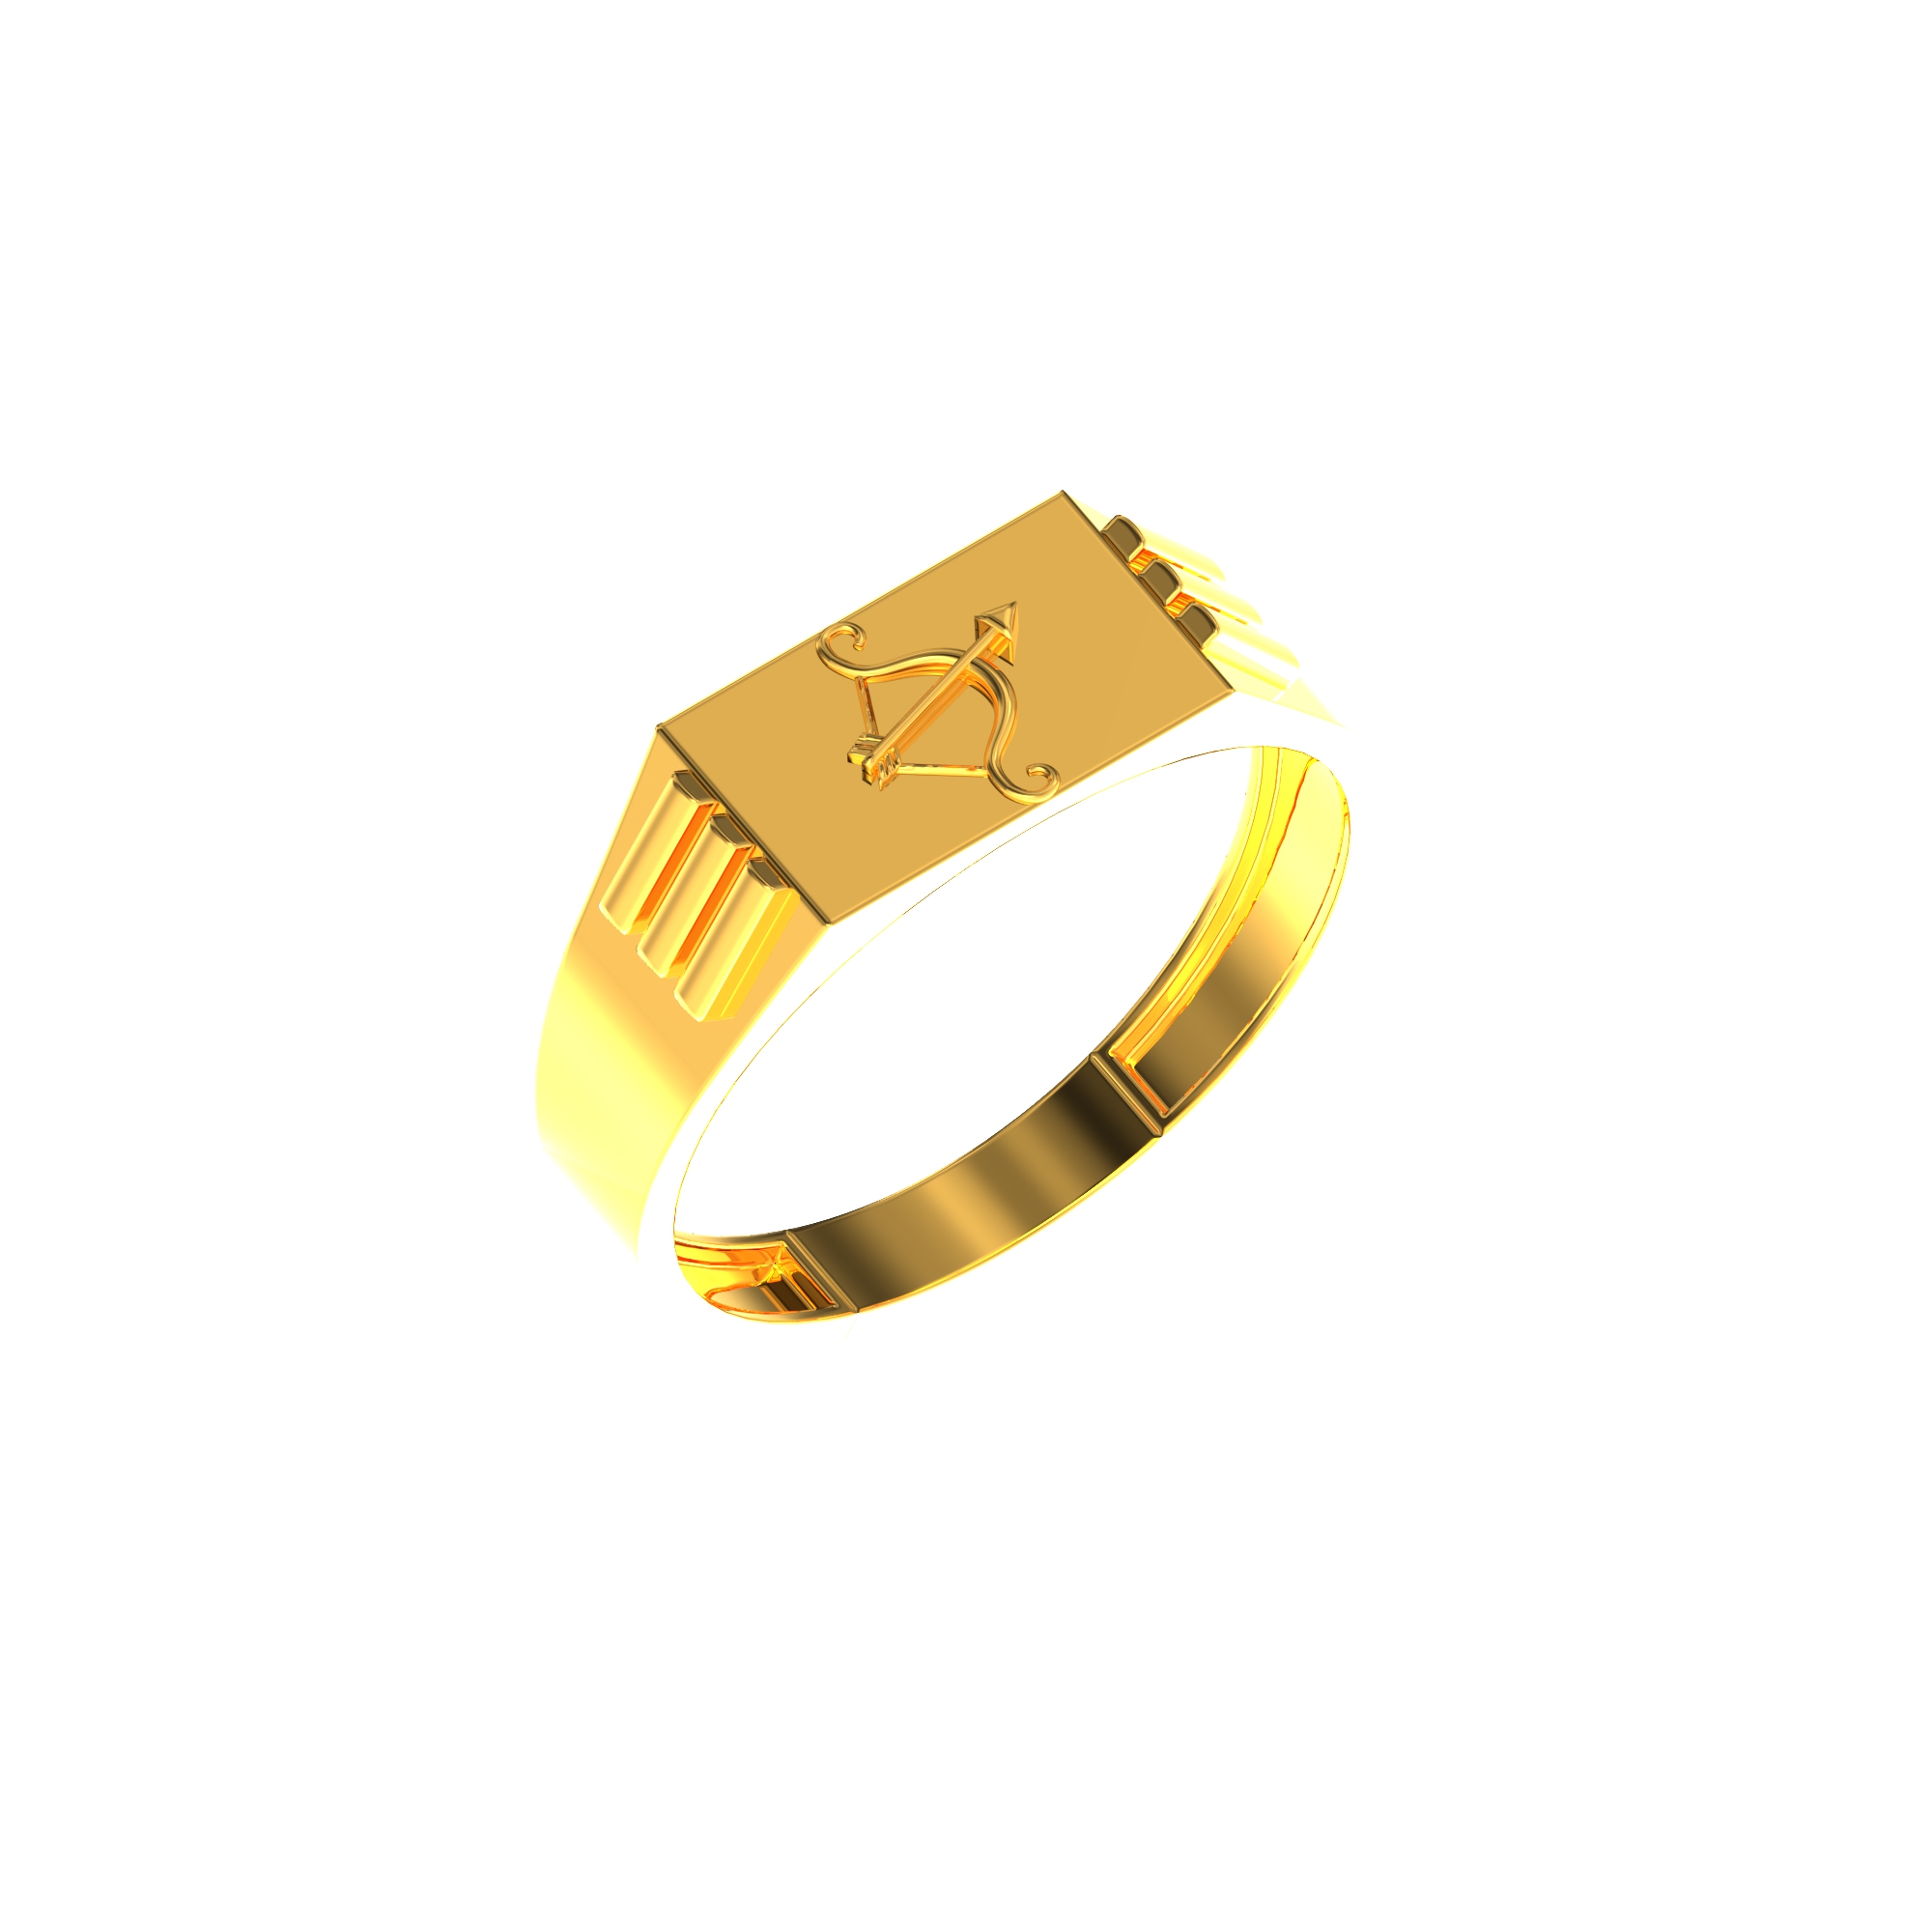 Gents Gold Ring with Arrow Design